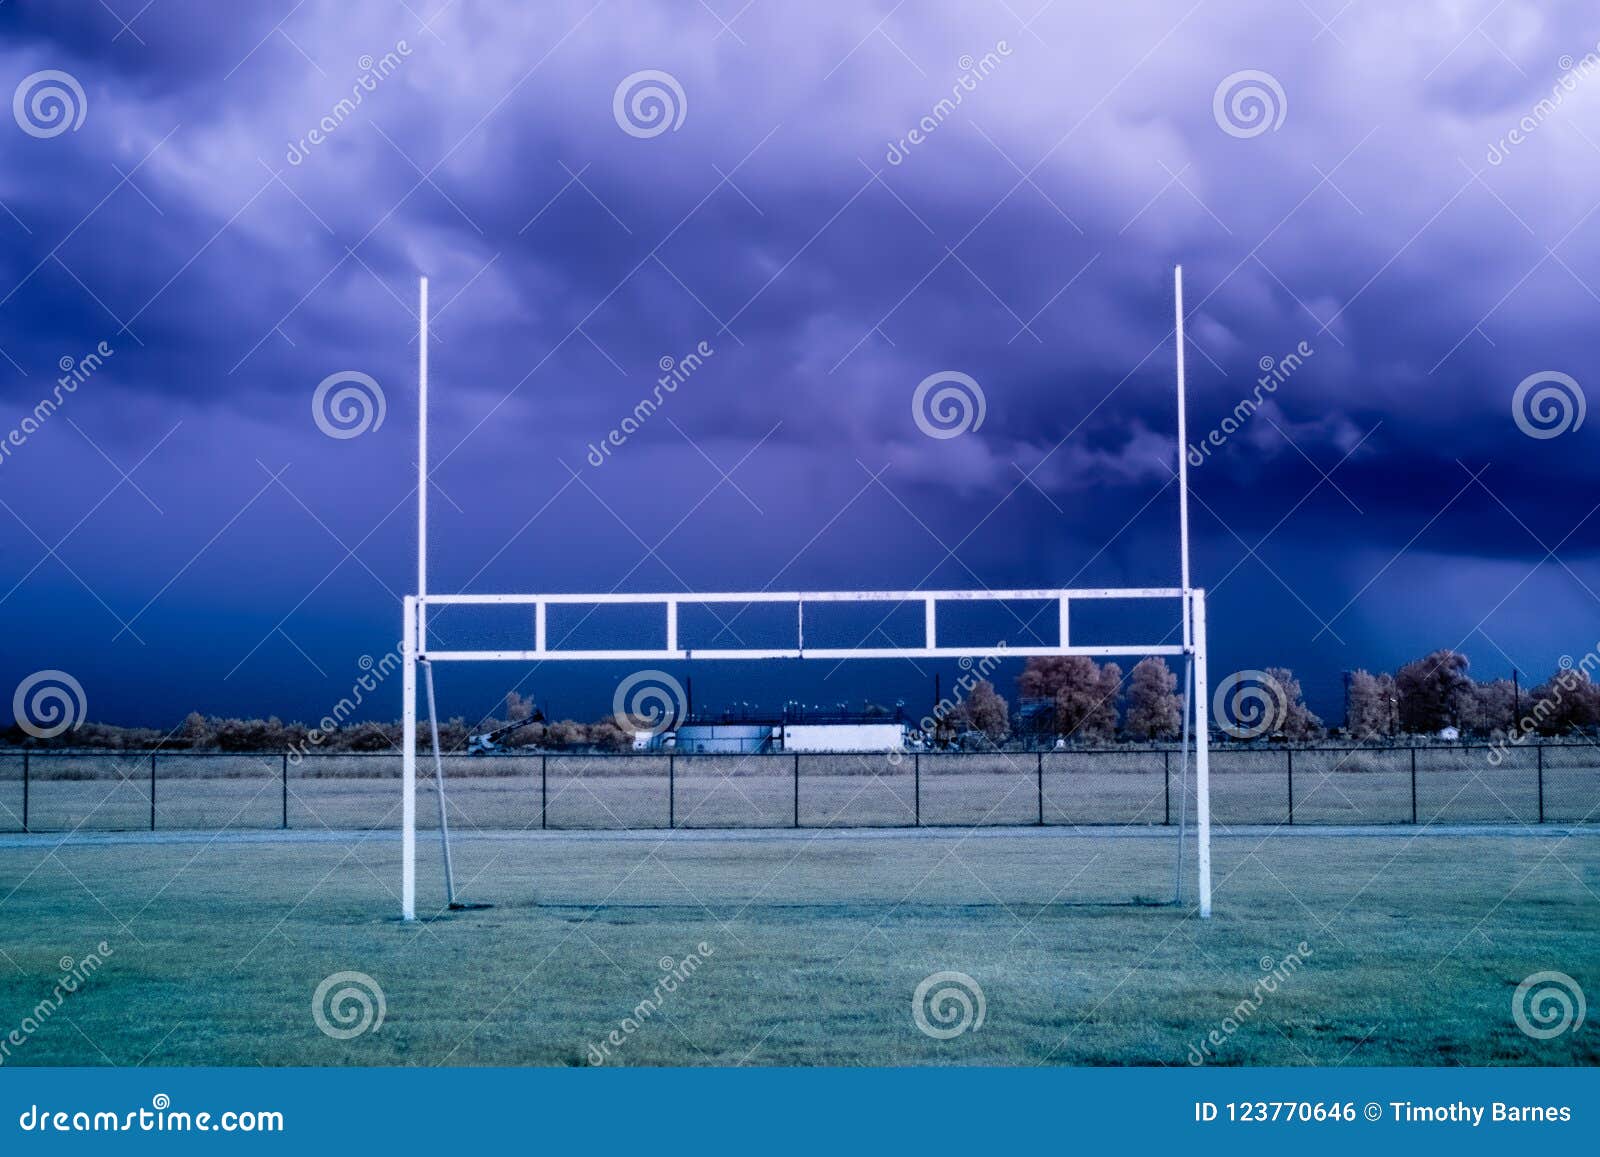 American Football Goal Posts before a Storm Editorial Photo - Image of